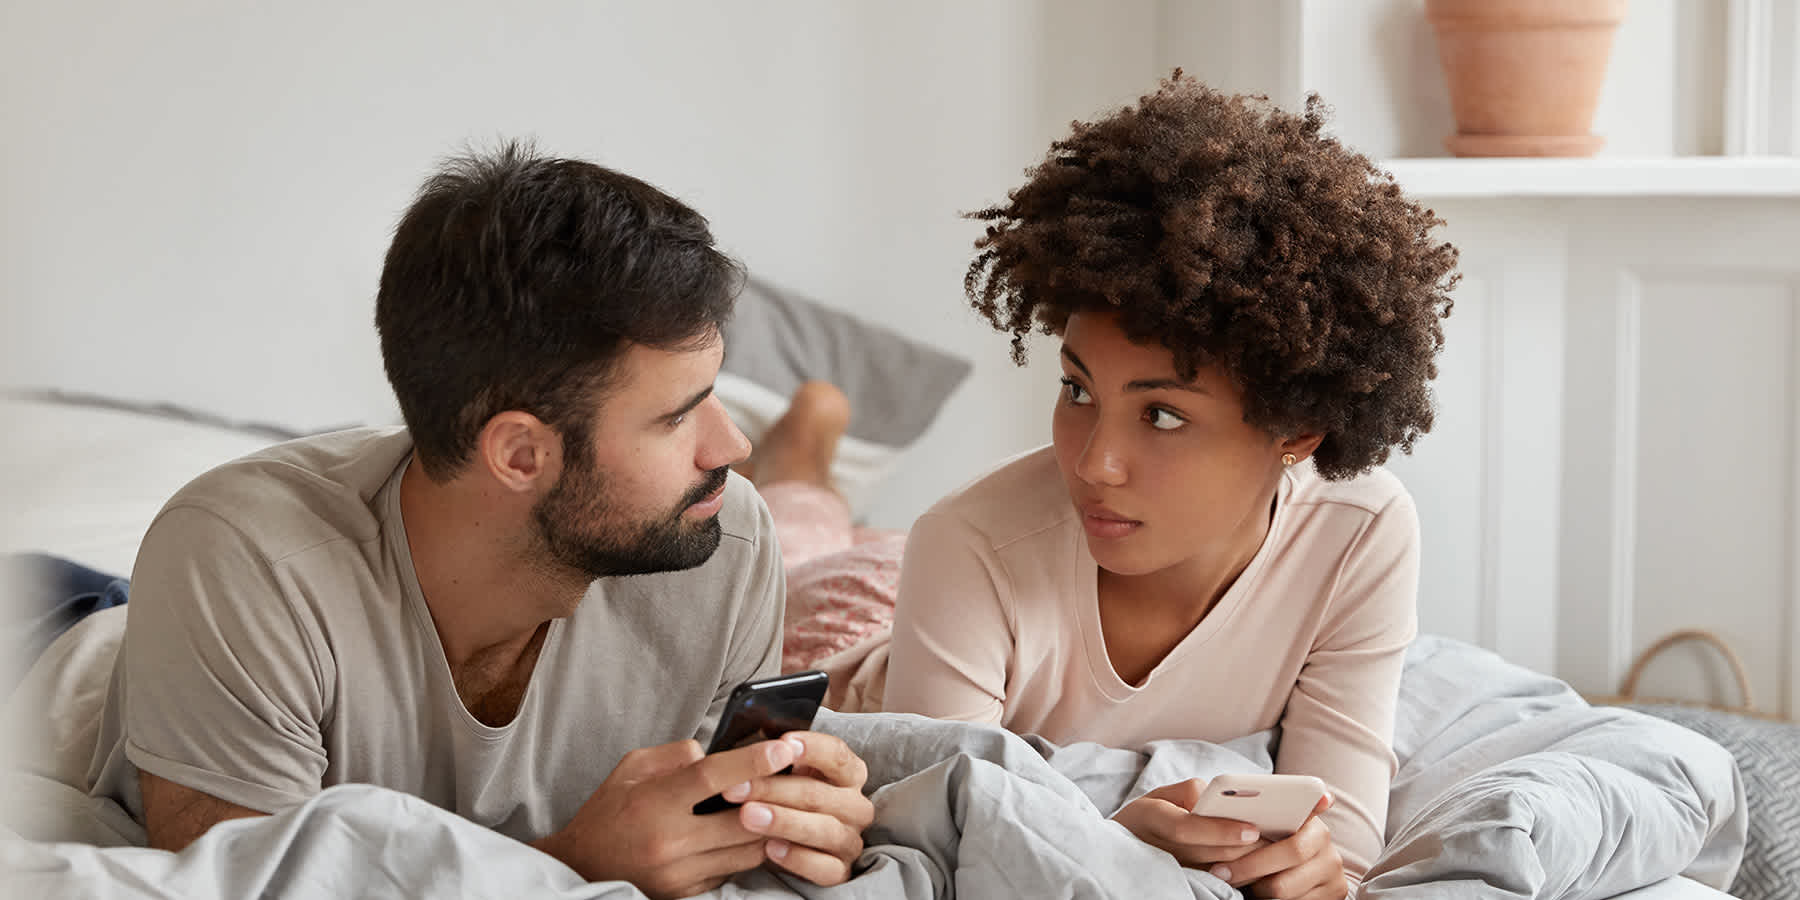 Couple in bed looking up whether prediabetes can cause neuropathy on their mobile phones